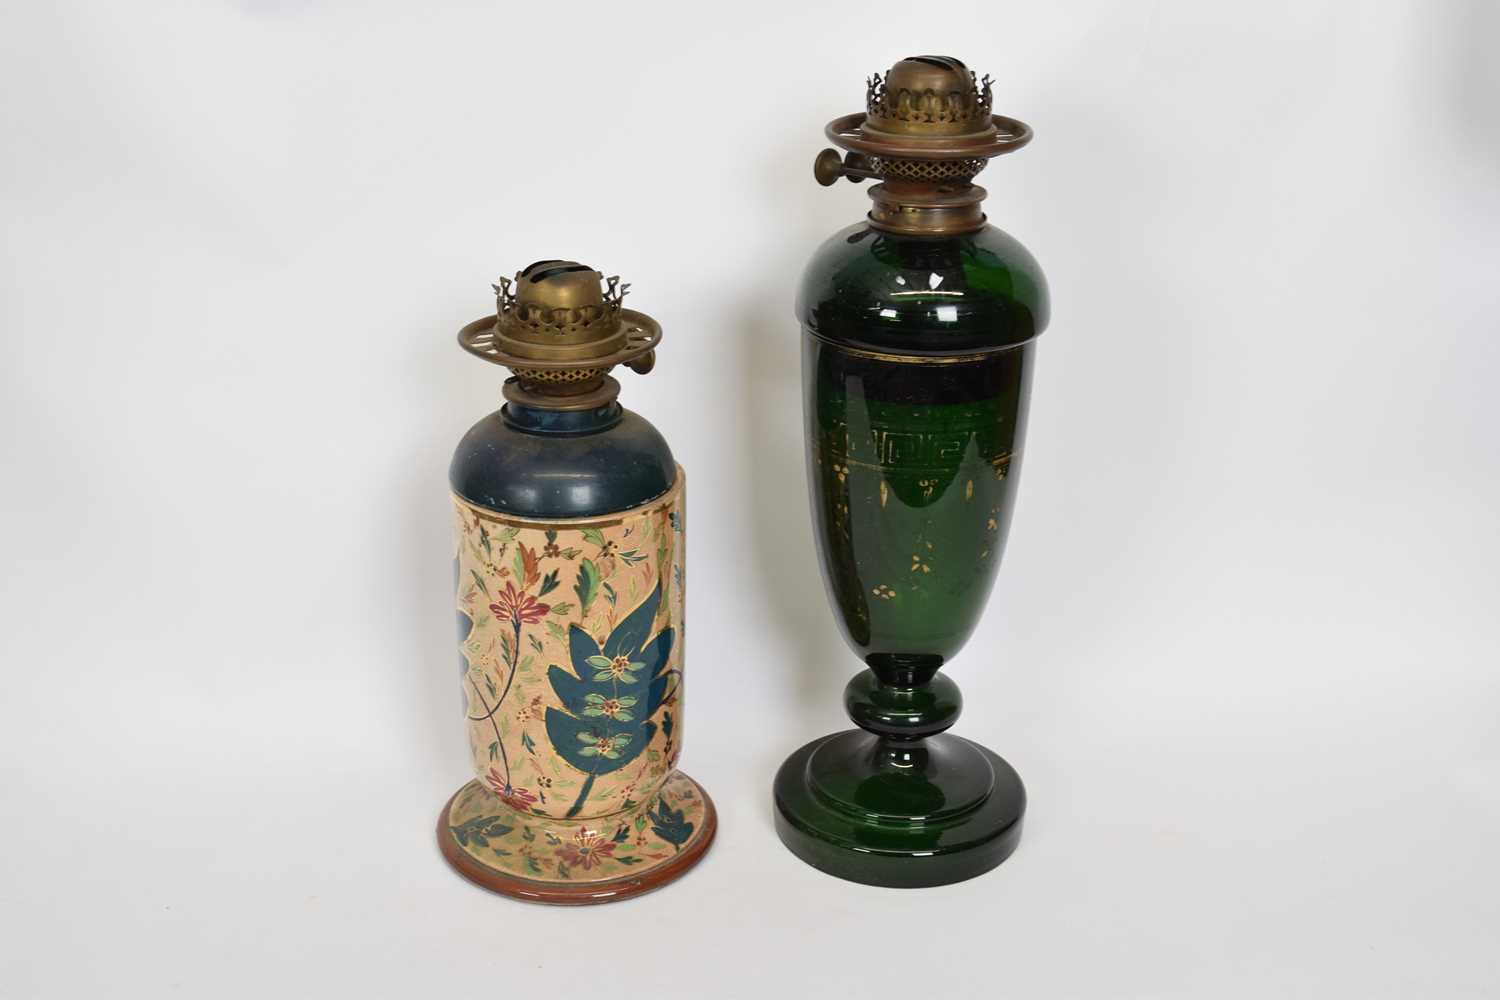 Two 19th century oil lamps, one green glass with gilt design (worn), the other with pottery base - Bild 2 aus 3